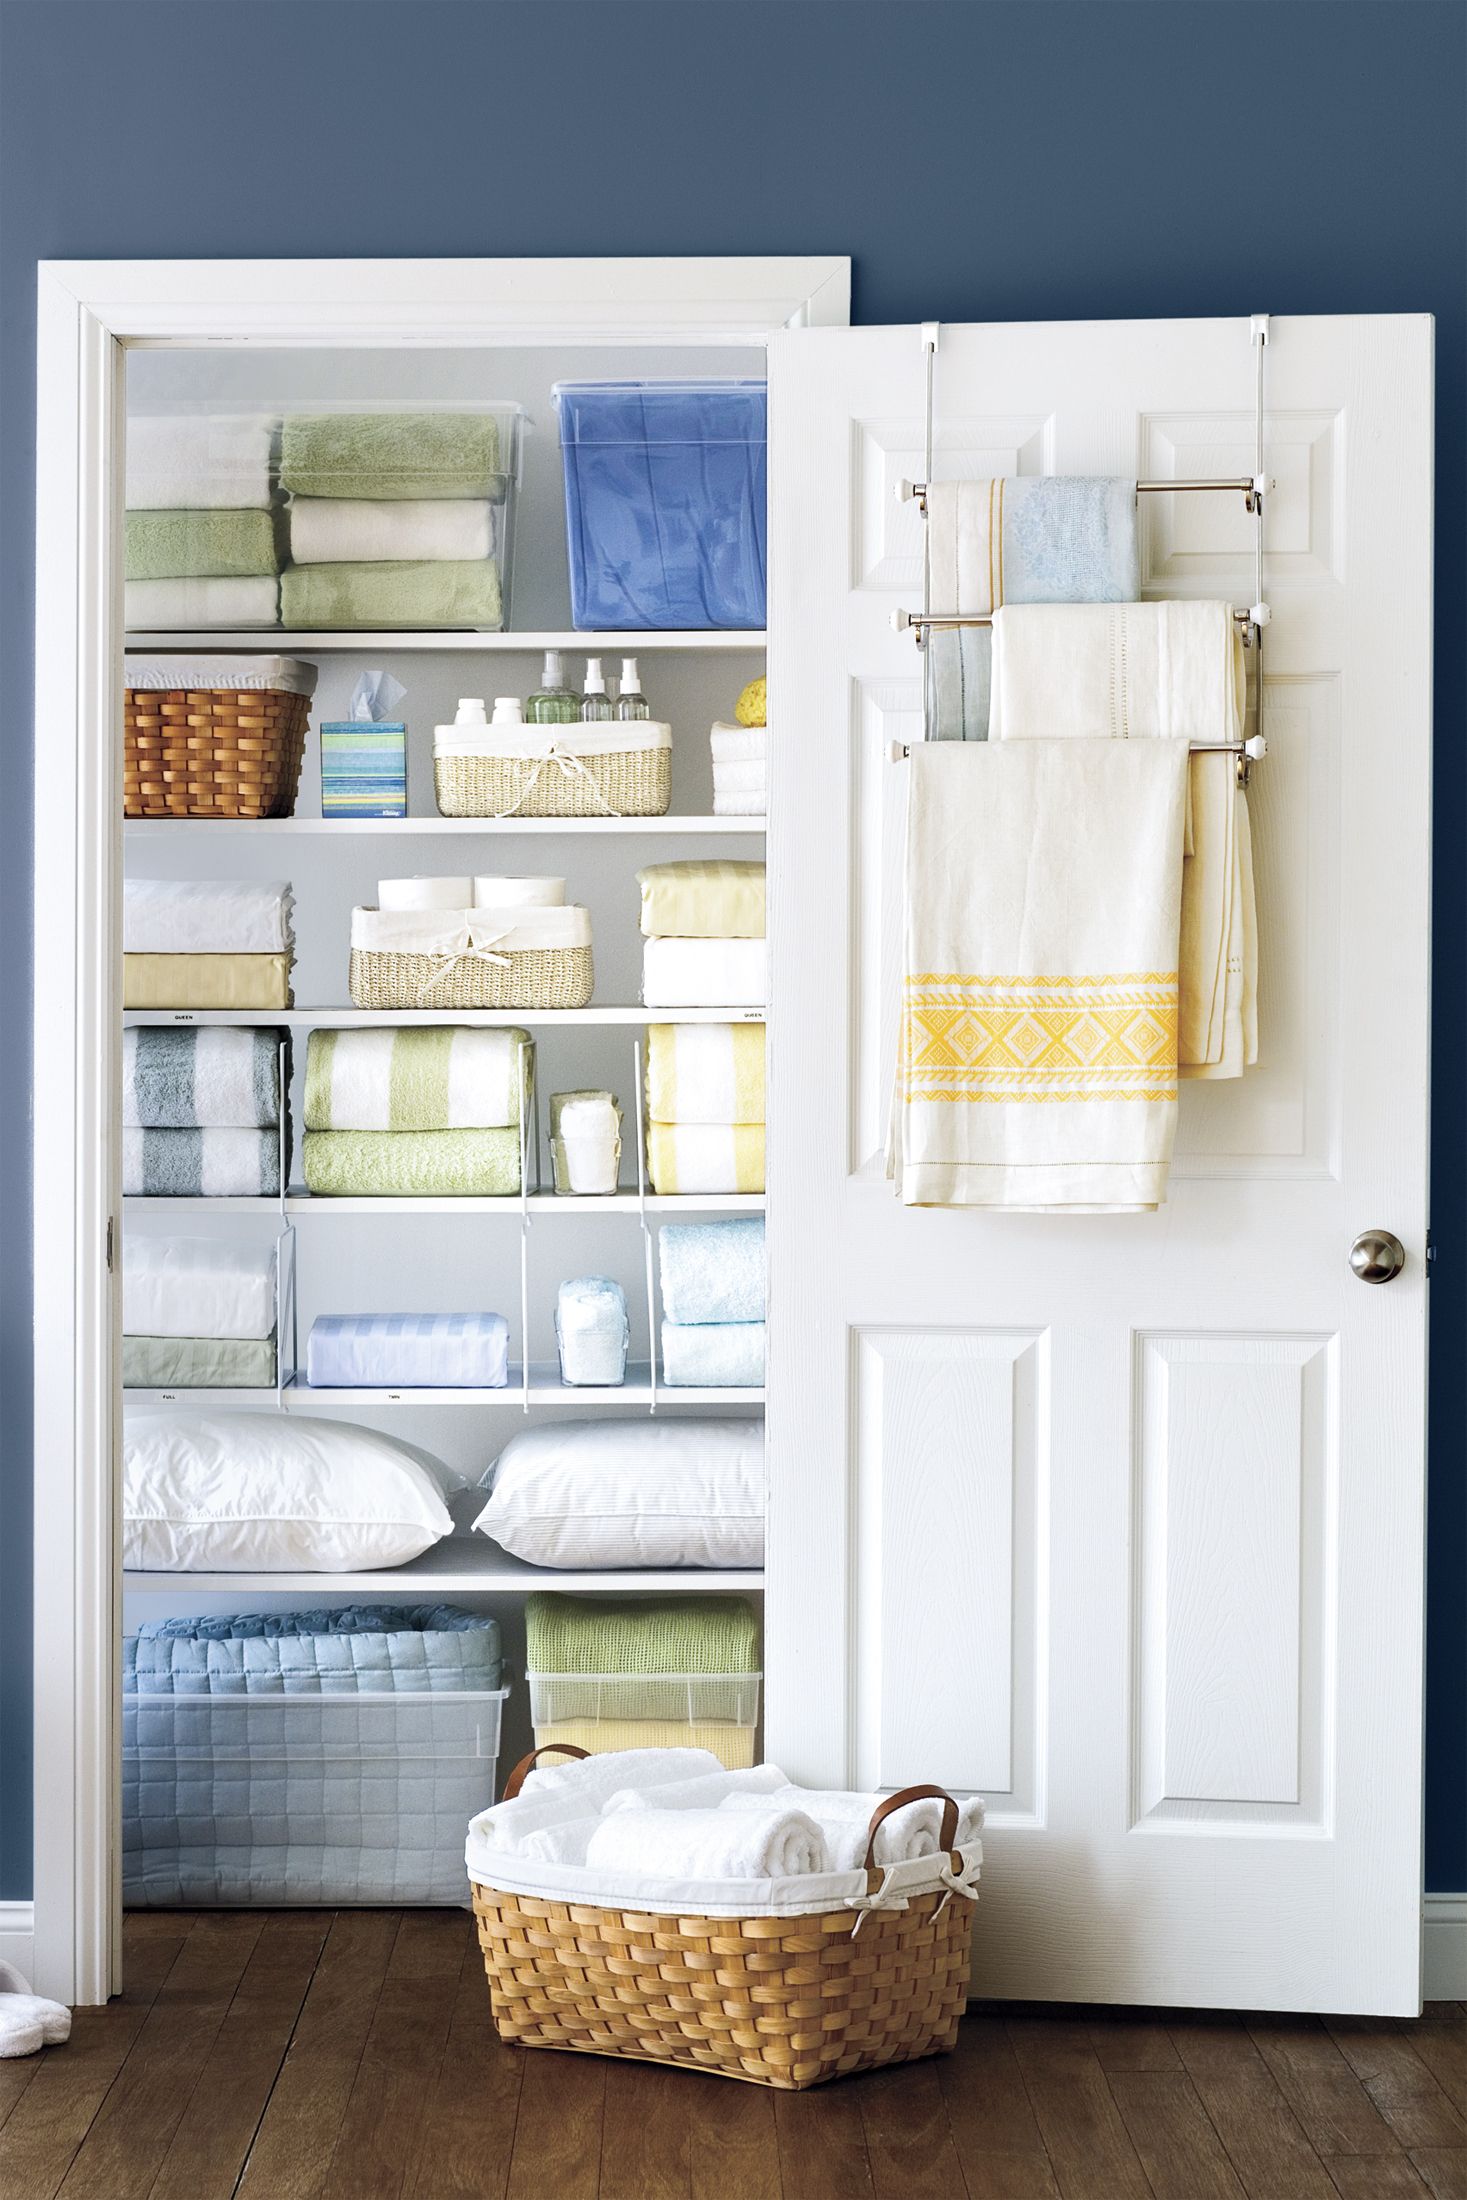 Best Organizing Tips - How to Organize Your Home